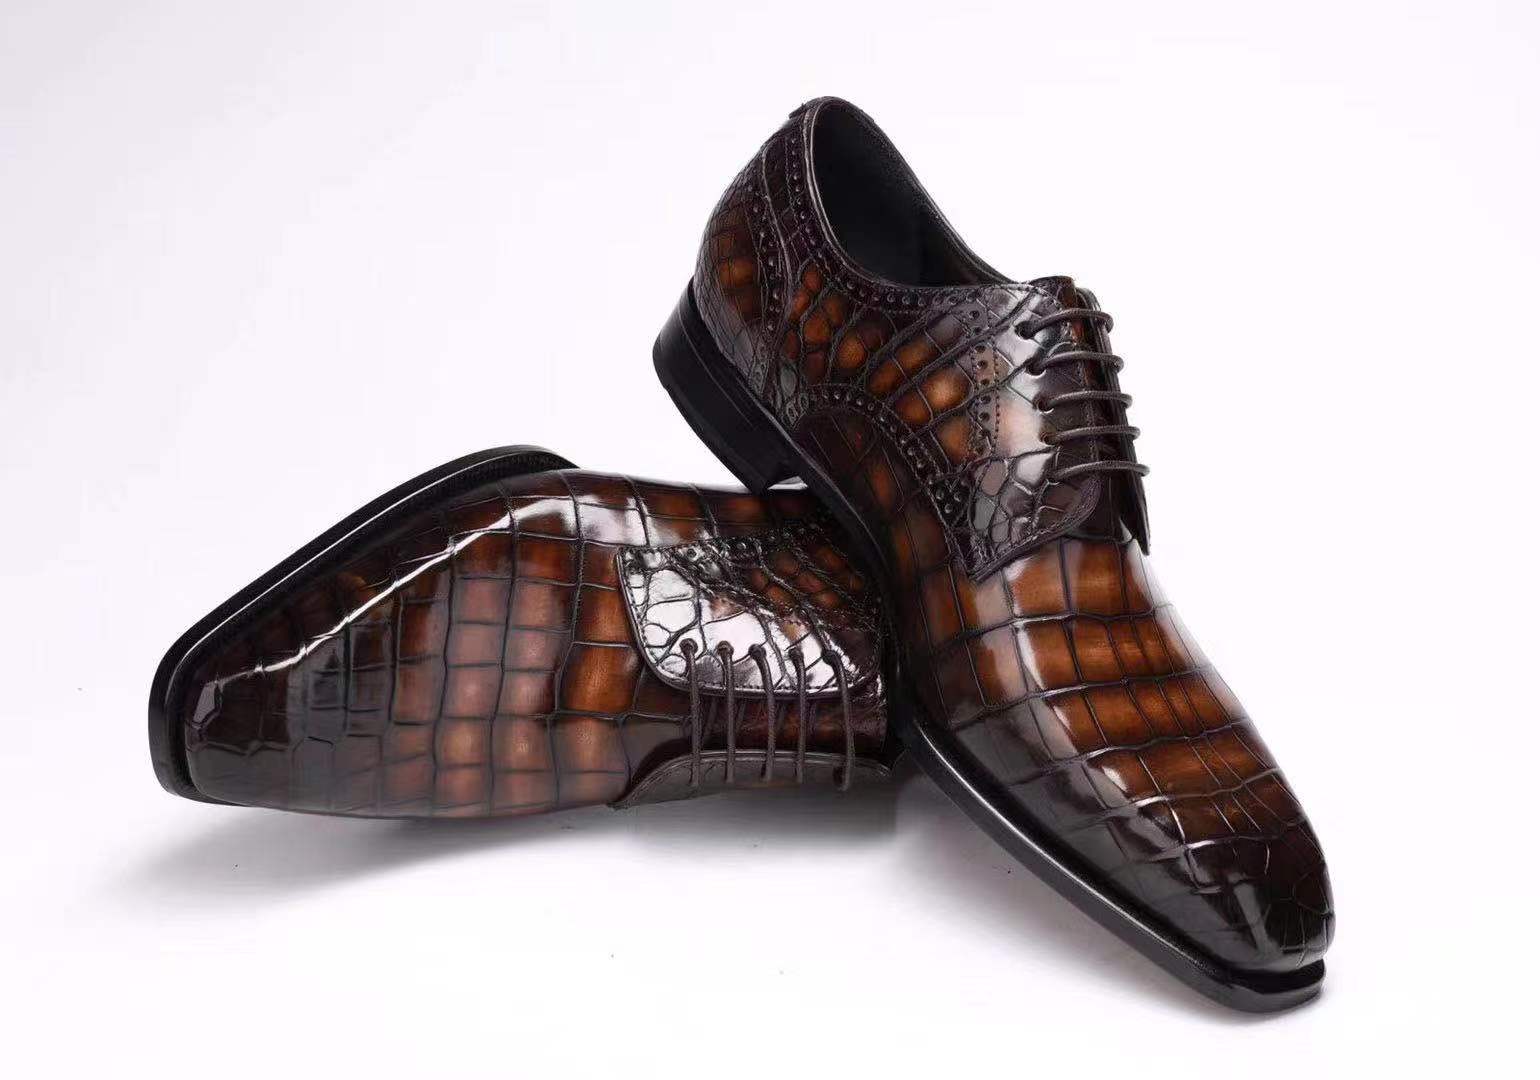 Men's Handmade Brown Alligator Leather Oxfords – Finely Crafted